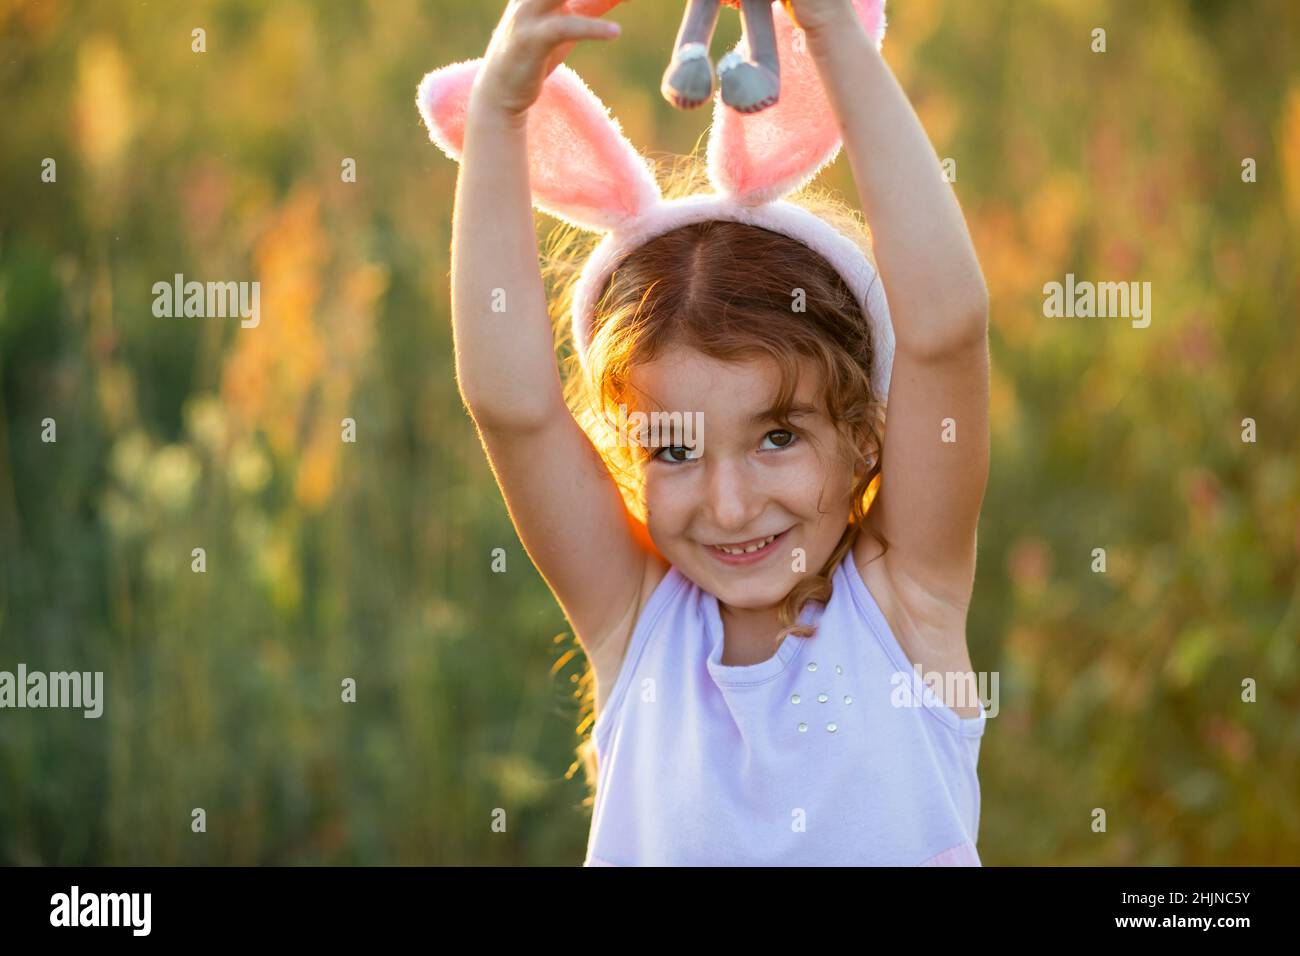 Cute 5-year-old girl with rabbit ears gently hugs a toy rabbit in nature in a blooming field in summer with golden sunlight. Easter, Easter bunny, chi Stock Photo